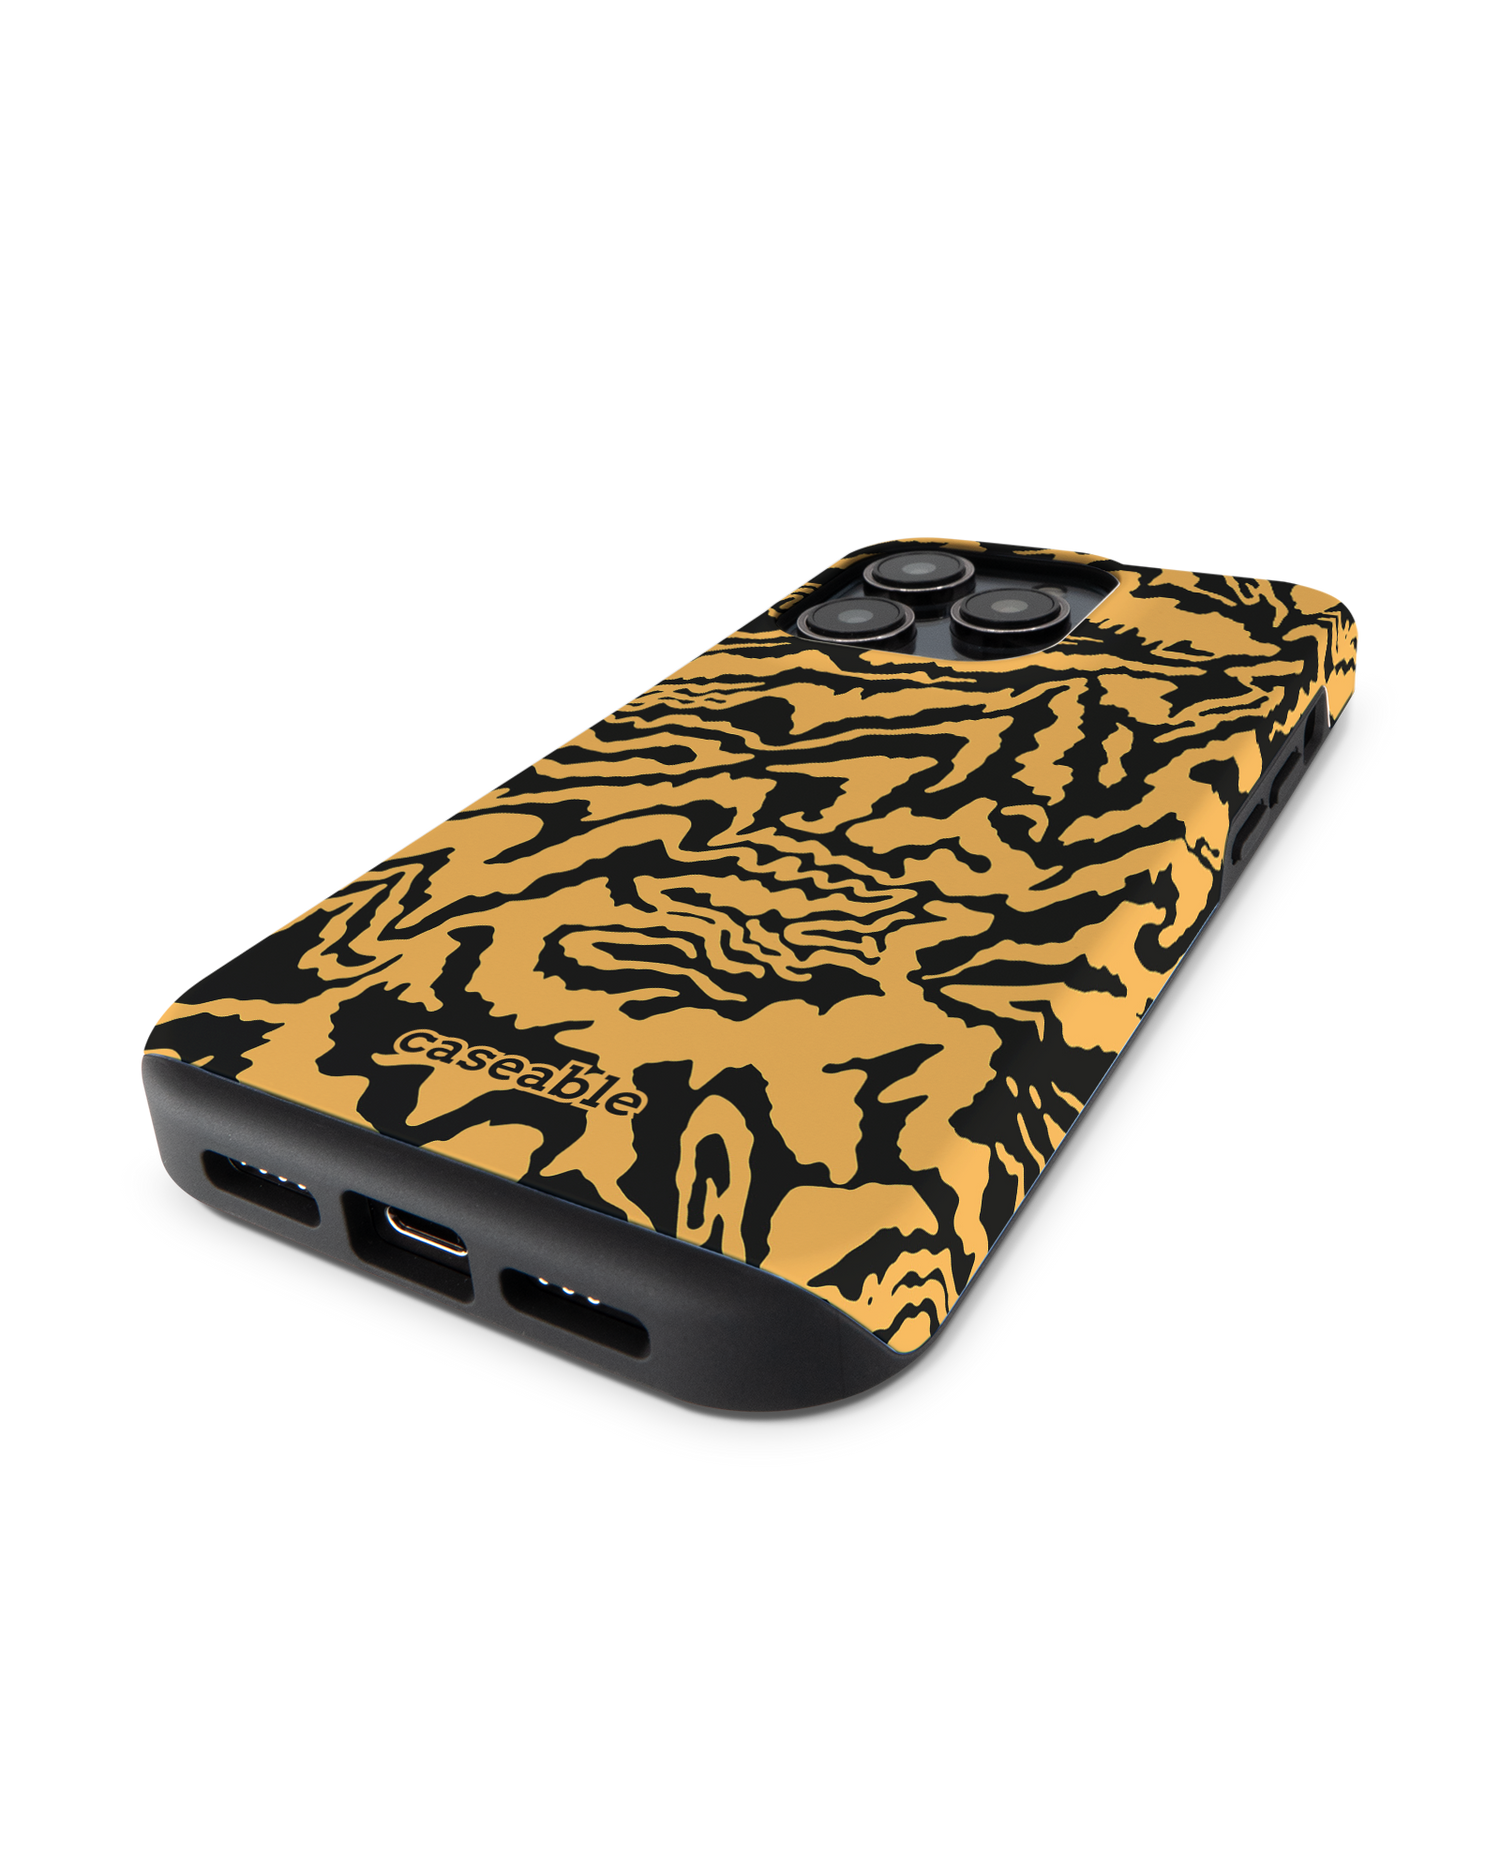 Warped Tiger Stripes Premium Phone Case for Apple iPhone 14 Pro: Lying